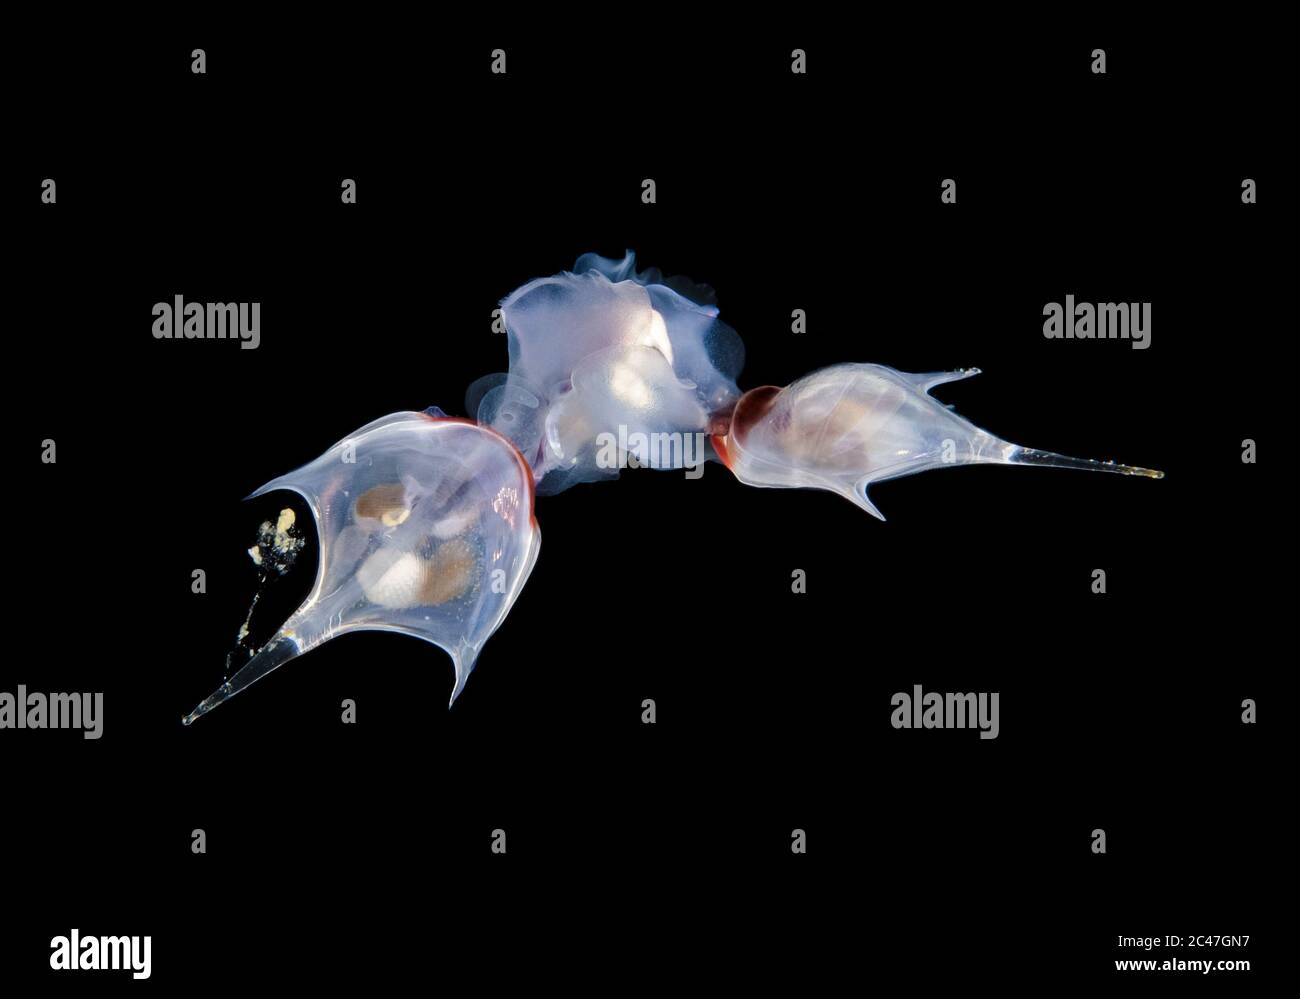 Sea Butterflies or Pteropod mollusks mating, Photographed during a Blackwater drift dive in open ocean at 50 feet with bottom at 600 plus feet below, Stock Photo